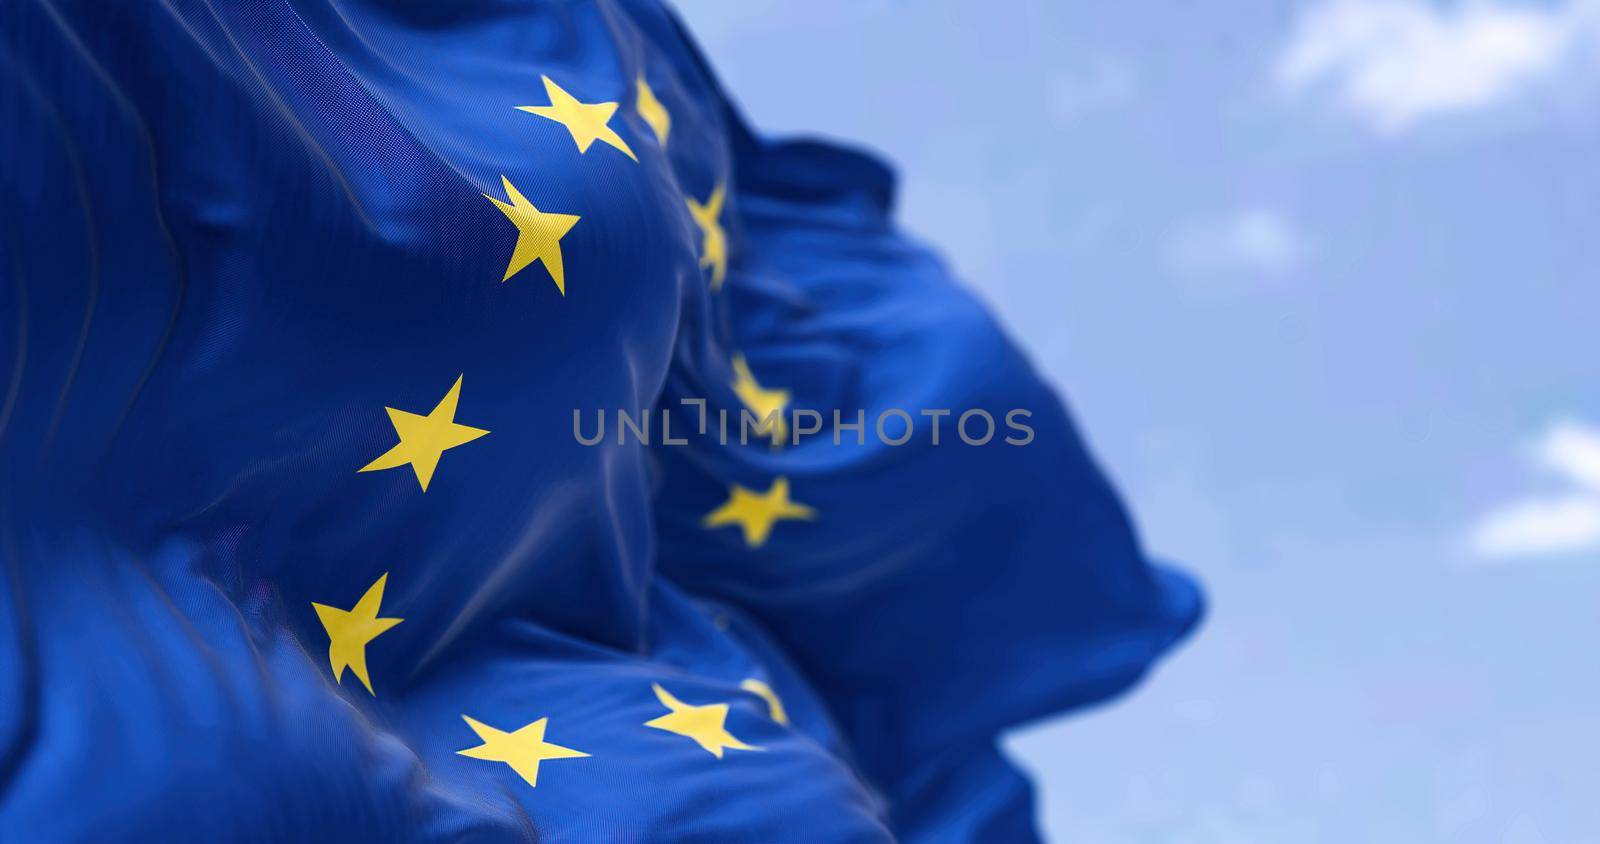 The flag of The European Union flapping in the wind by rarrarorro